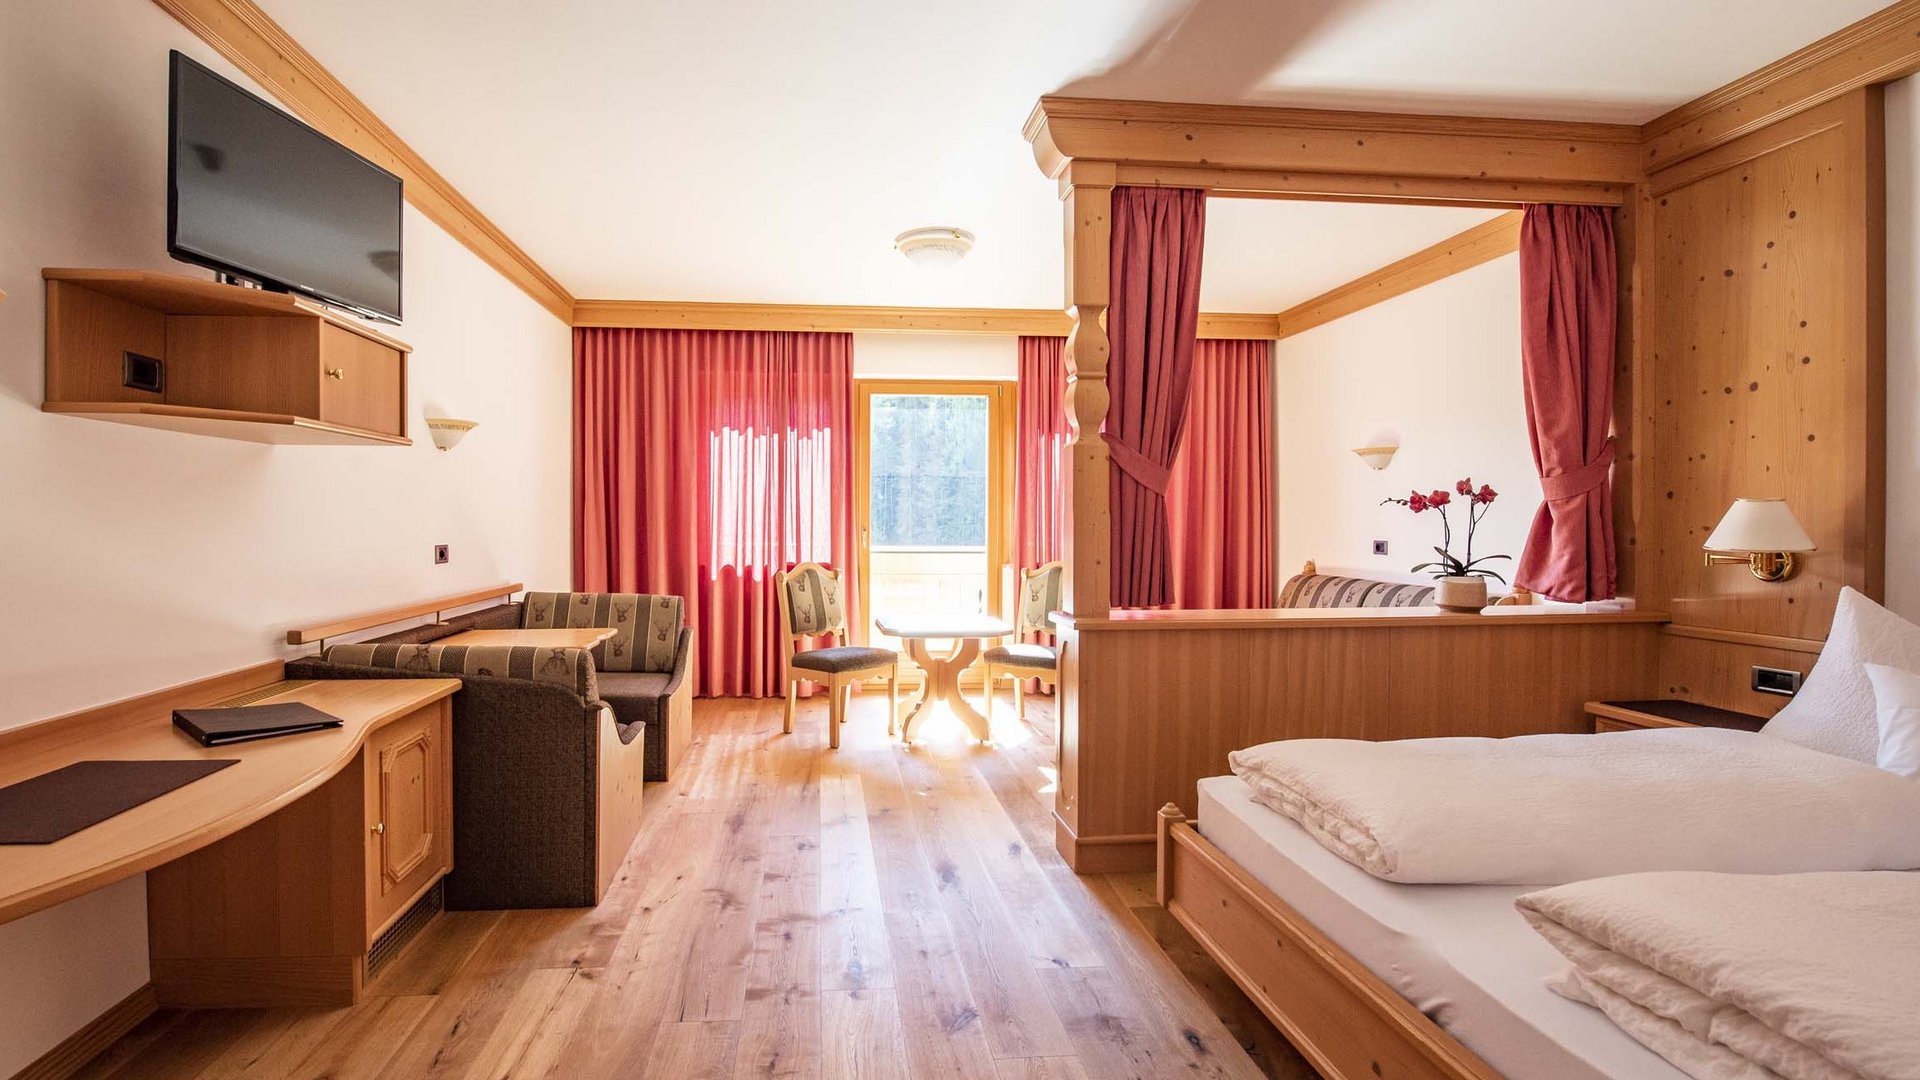 Price information for your 4-star hotel in the Dolomites